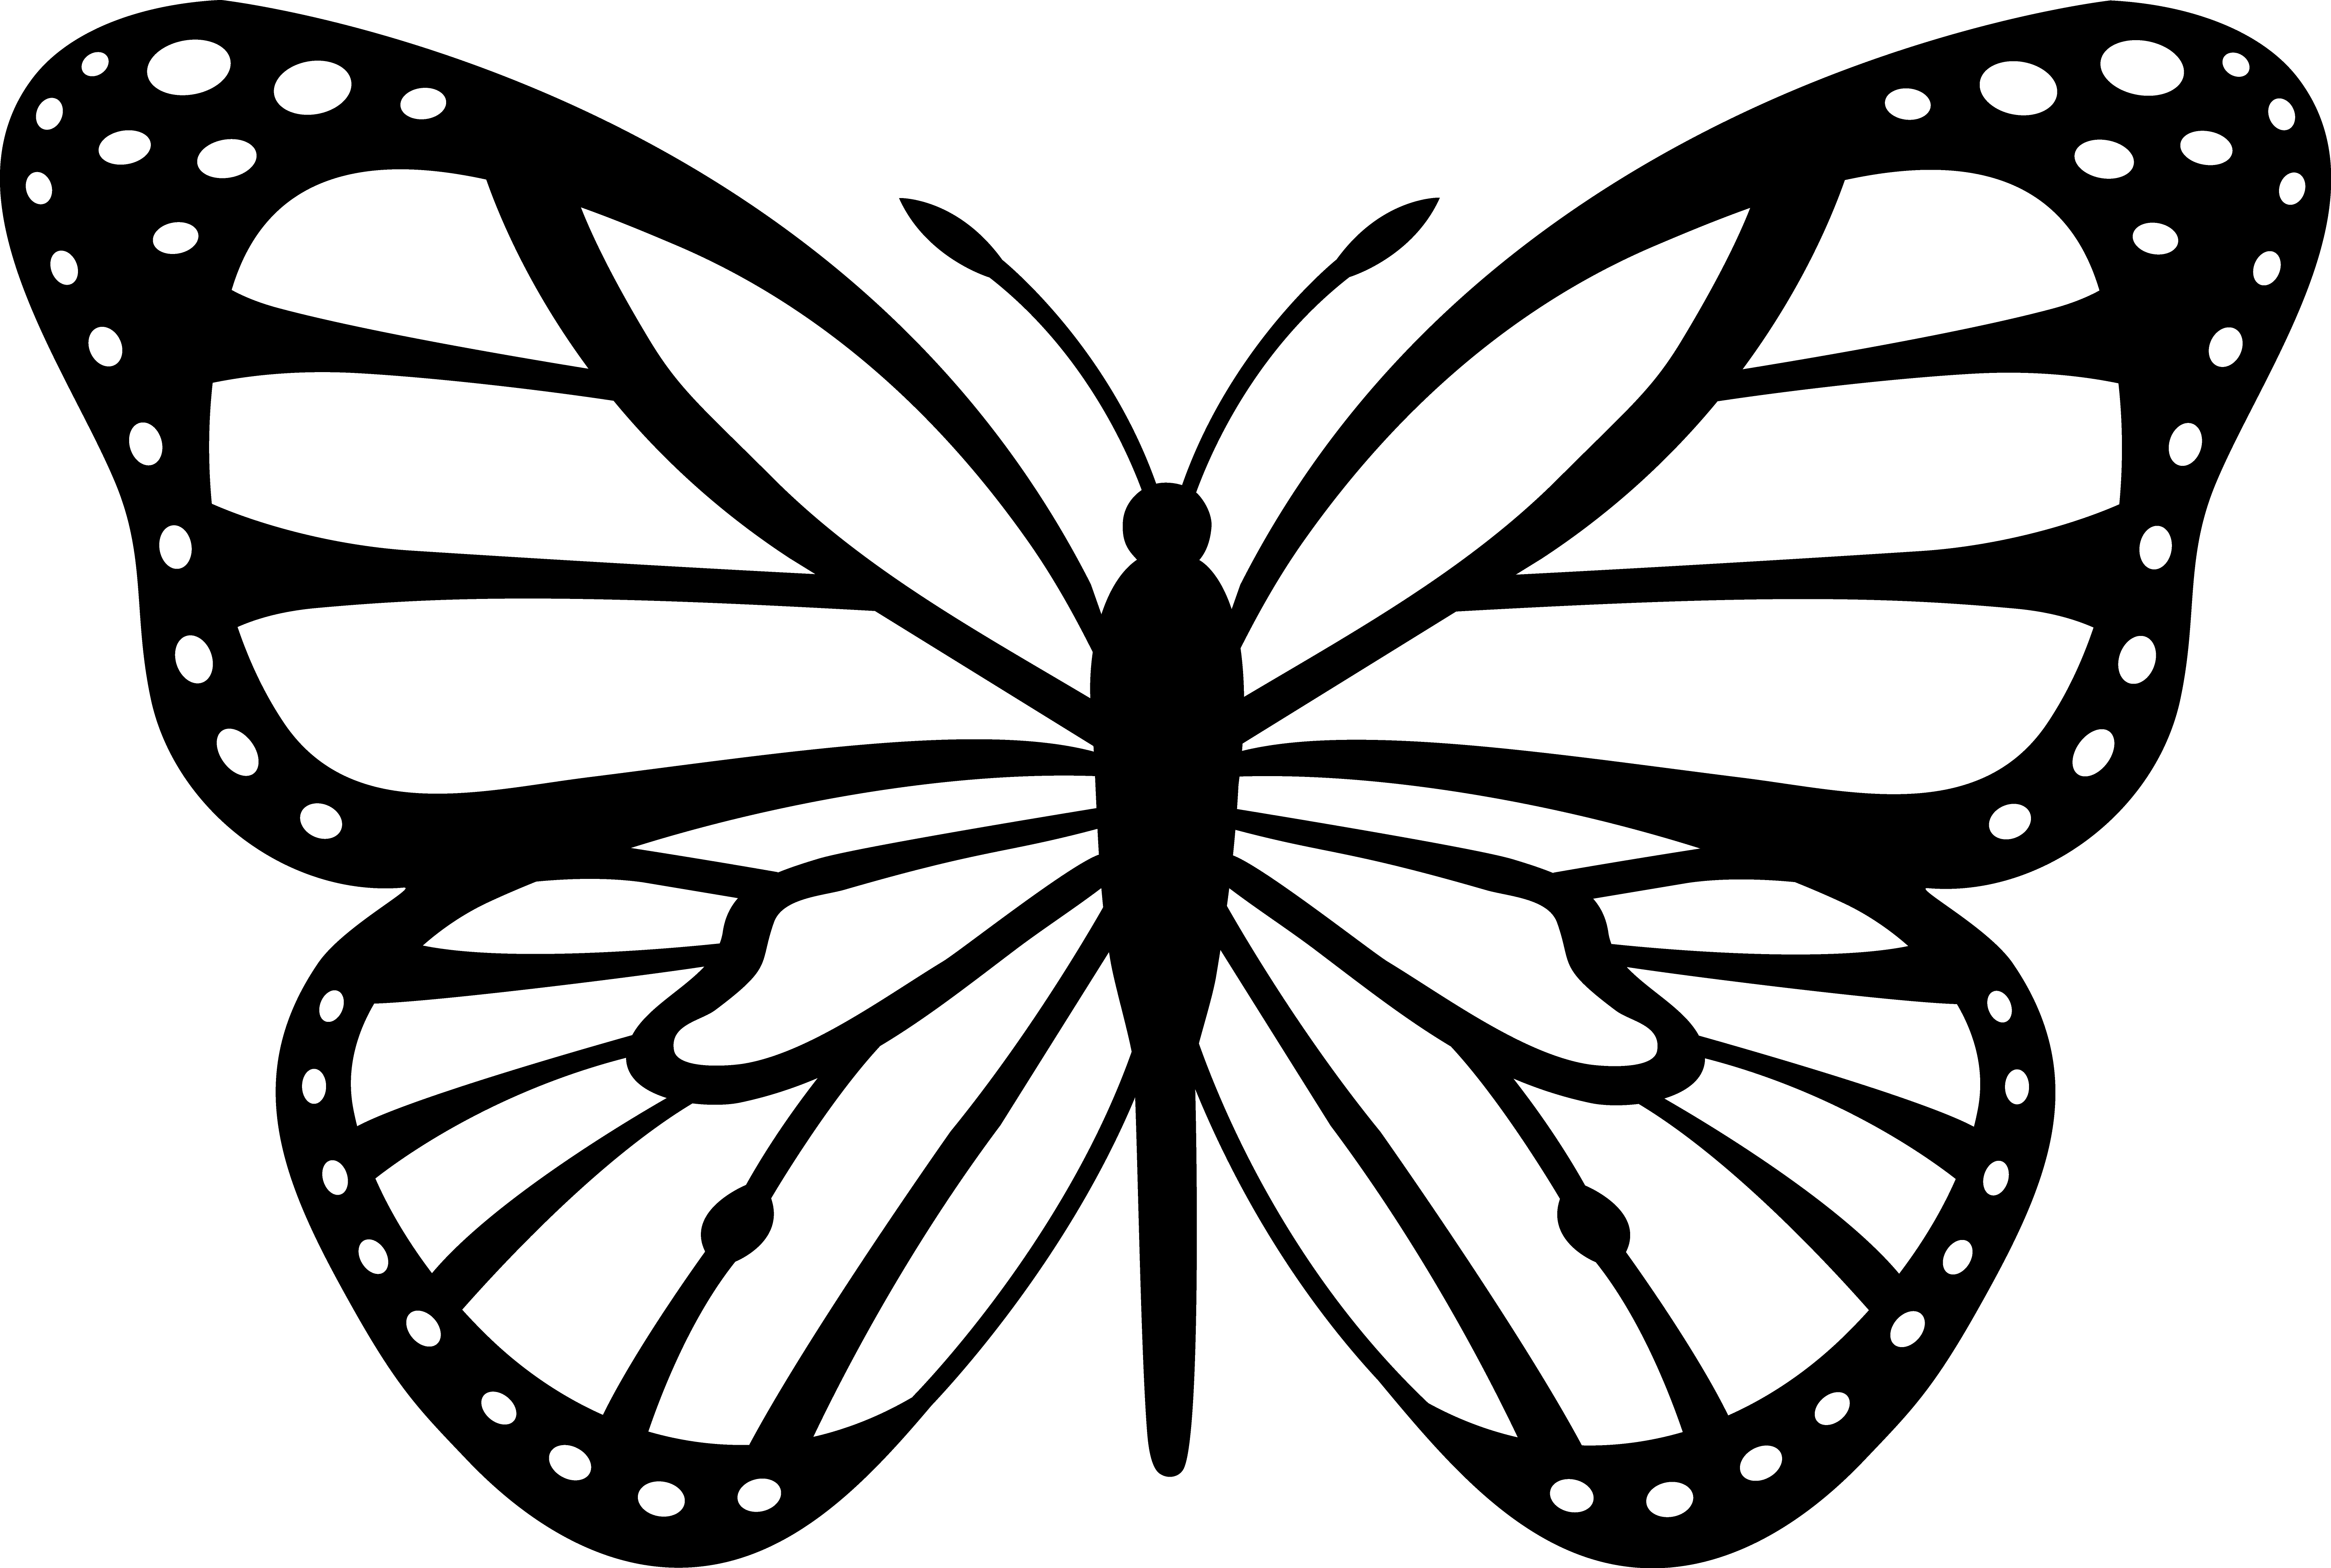 monarch butterfly coloring page - High Quality Coloring Pages